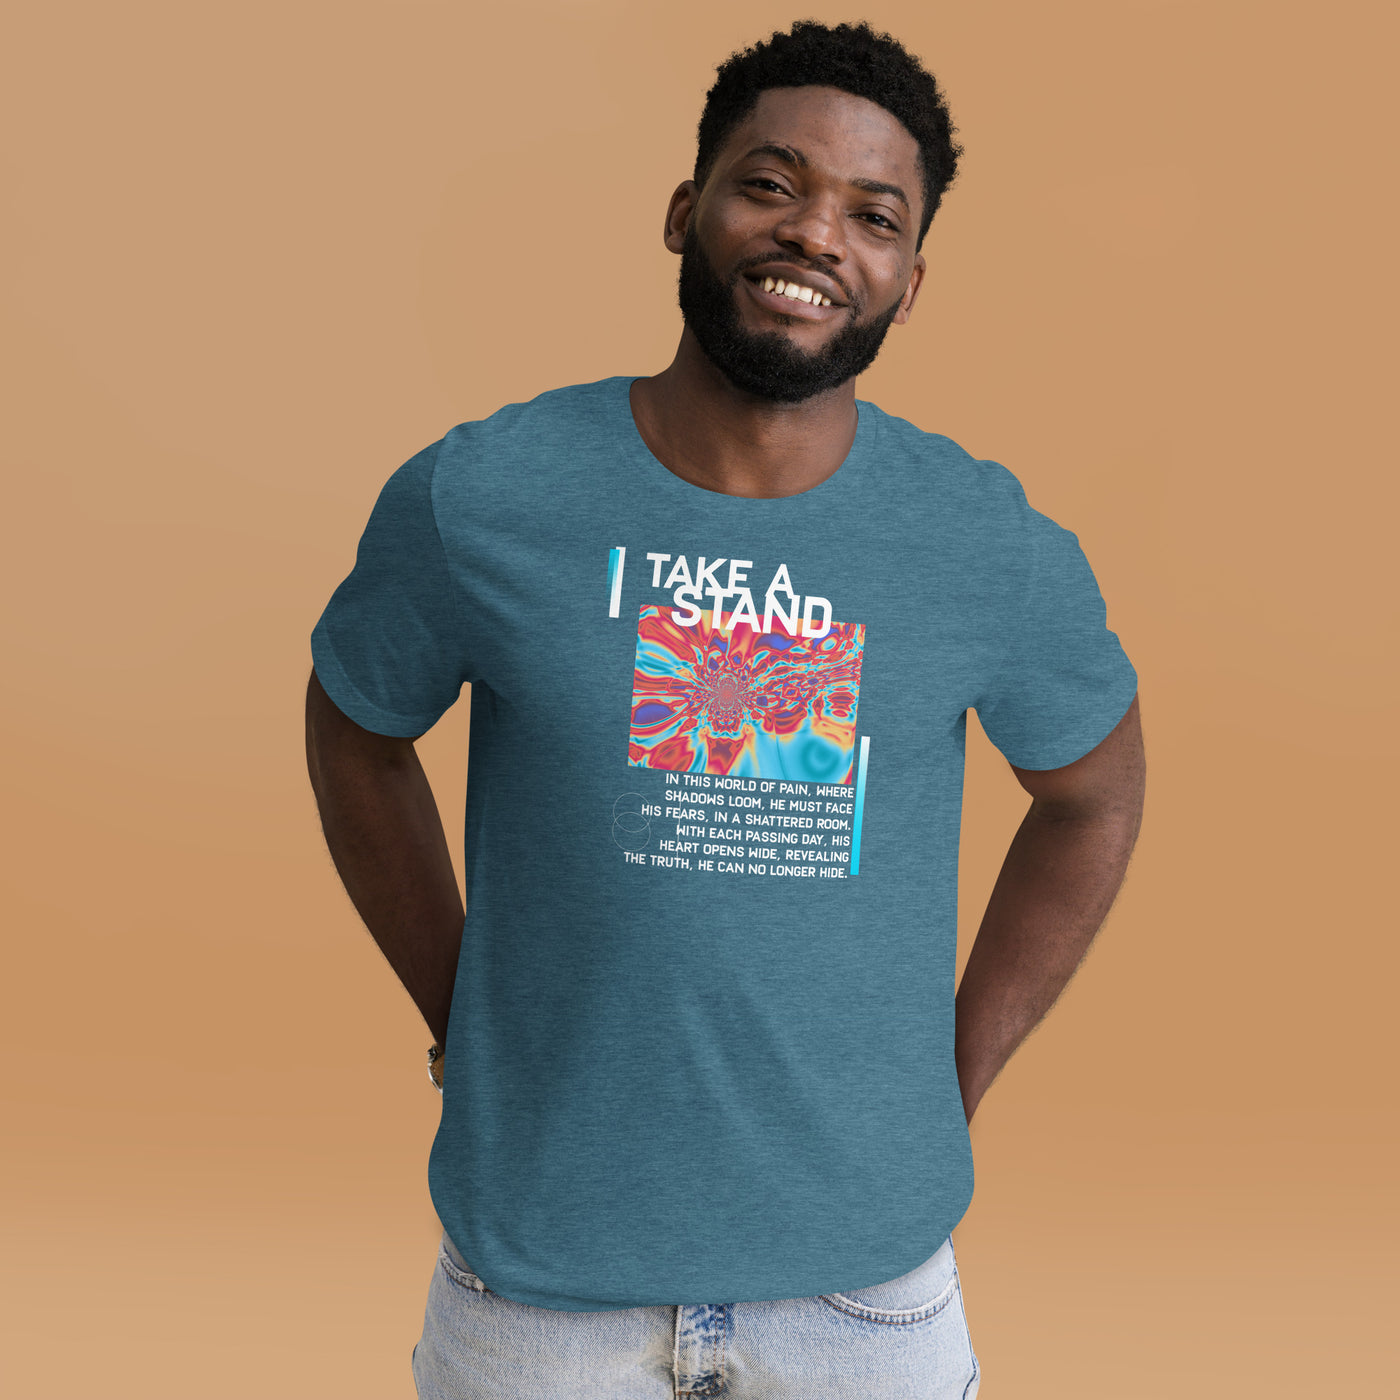 Take a Stand Plus Size Unisex Tee